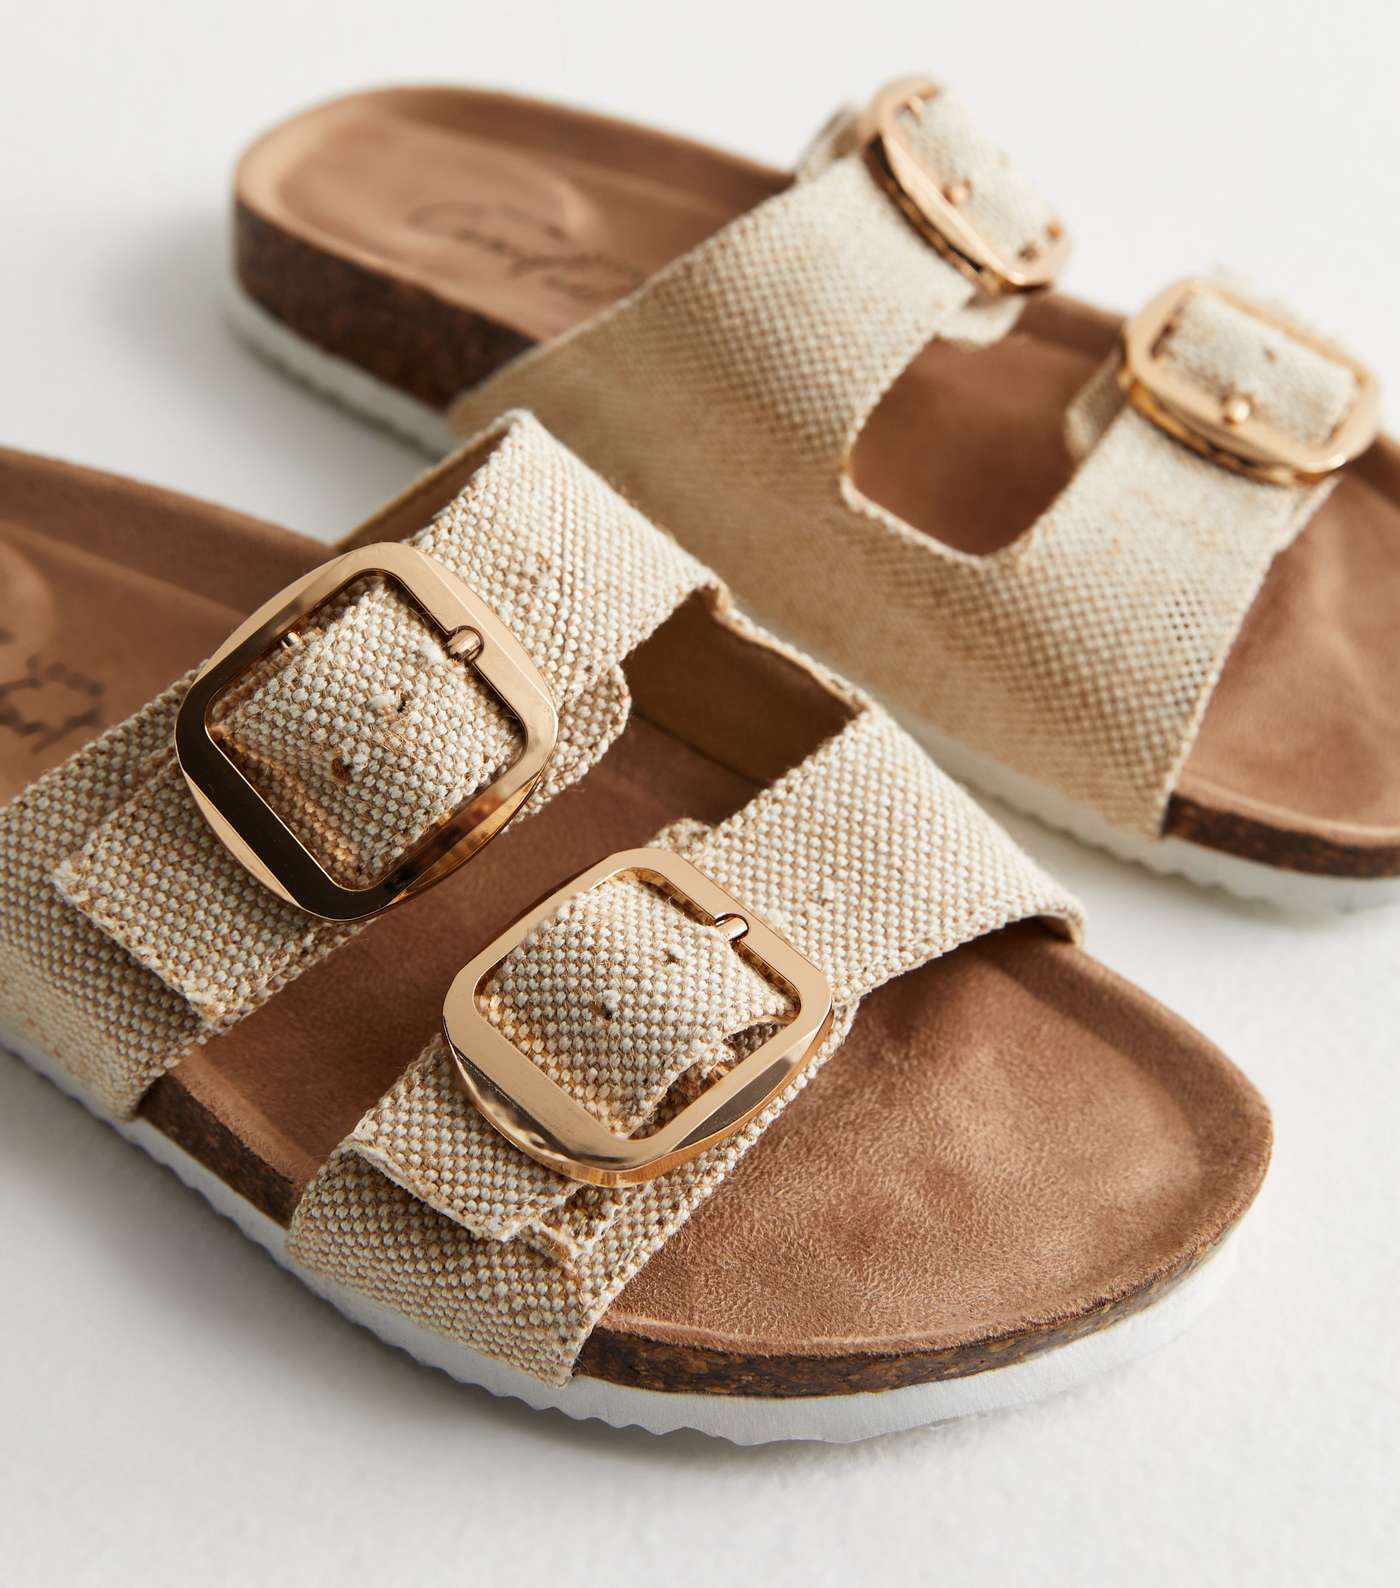 Off White Woven Buckle Footbed Sliders Image 3